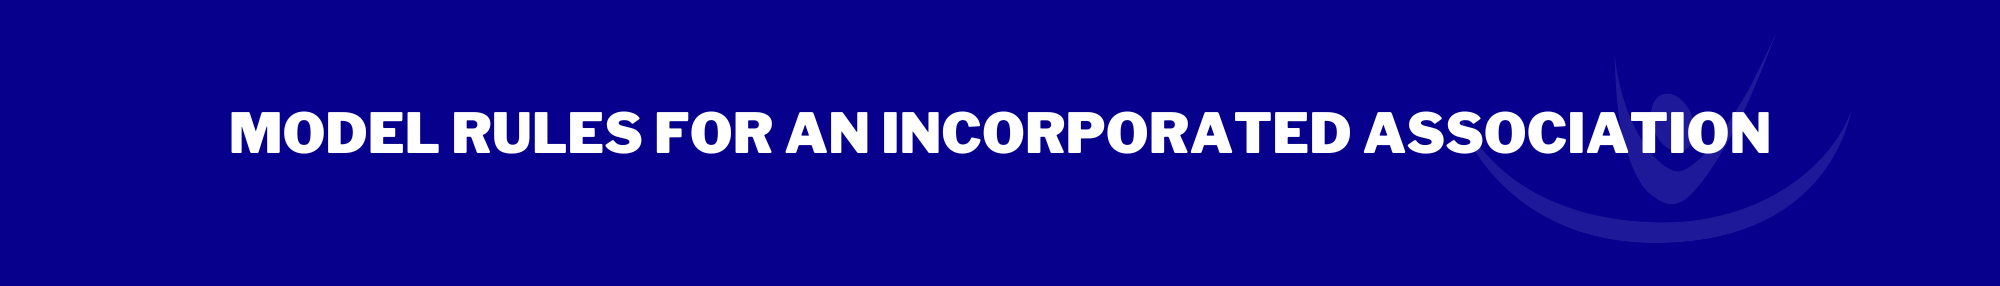 Model Rules for an Incorporated Association (1)